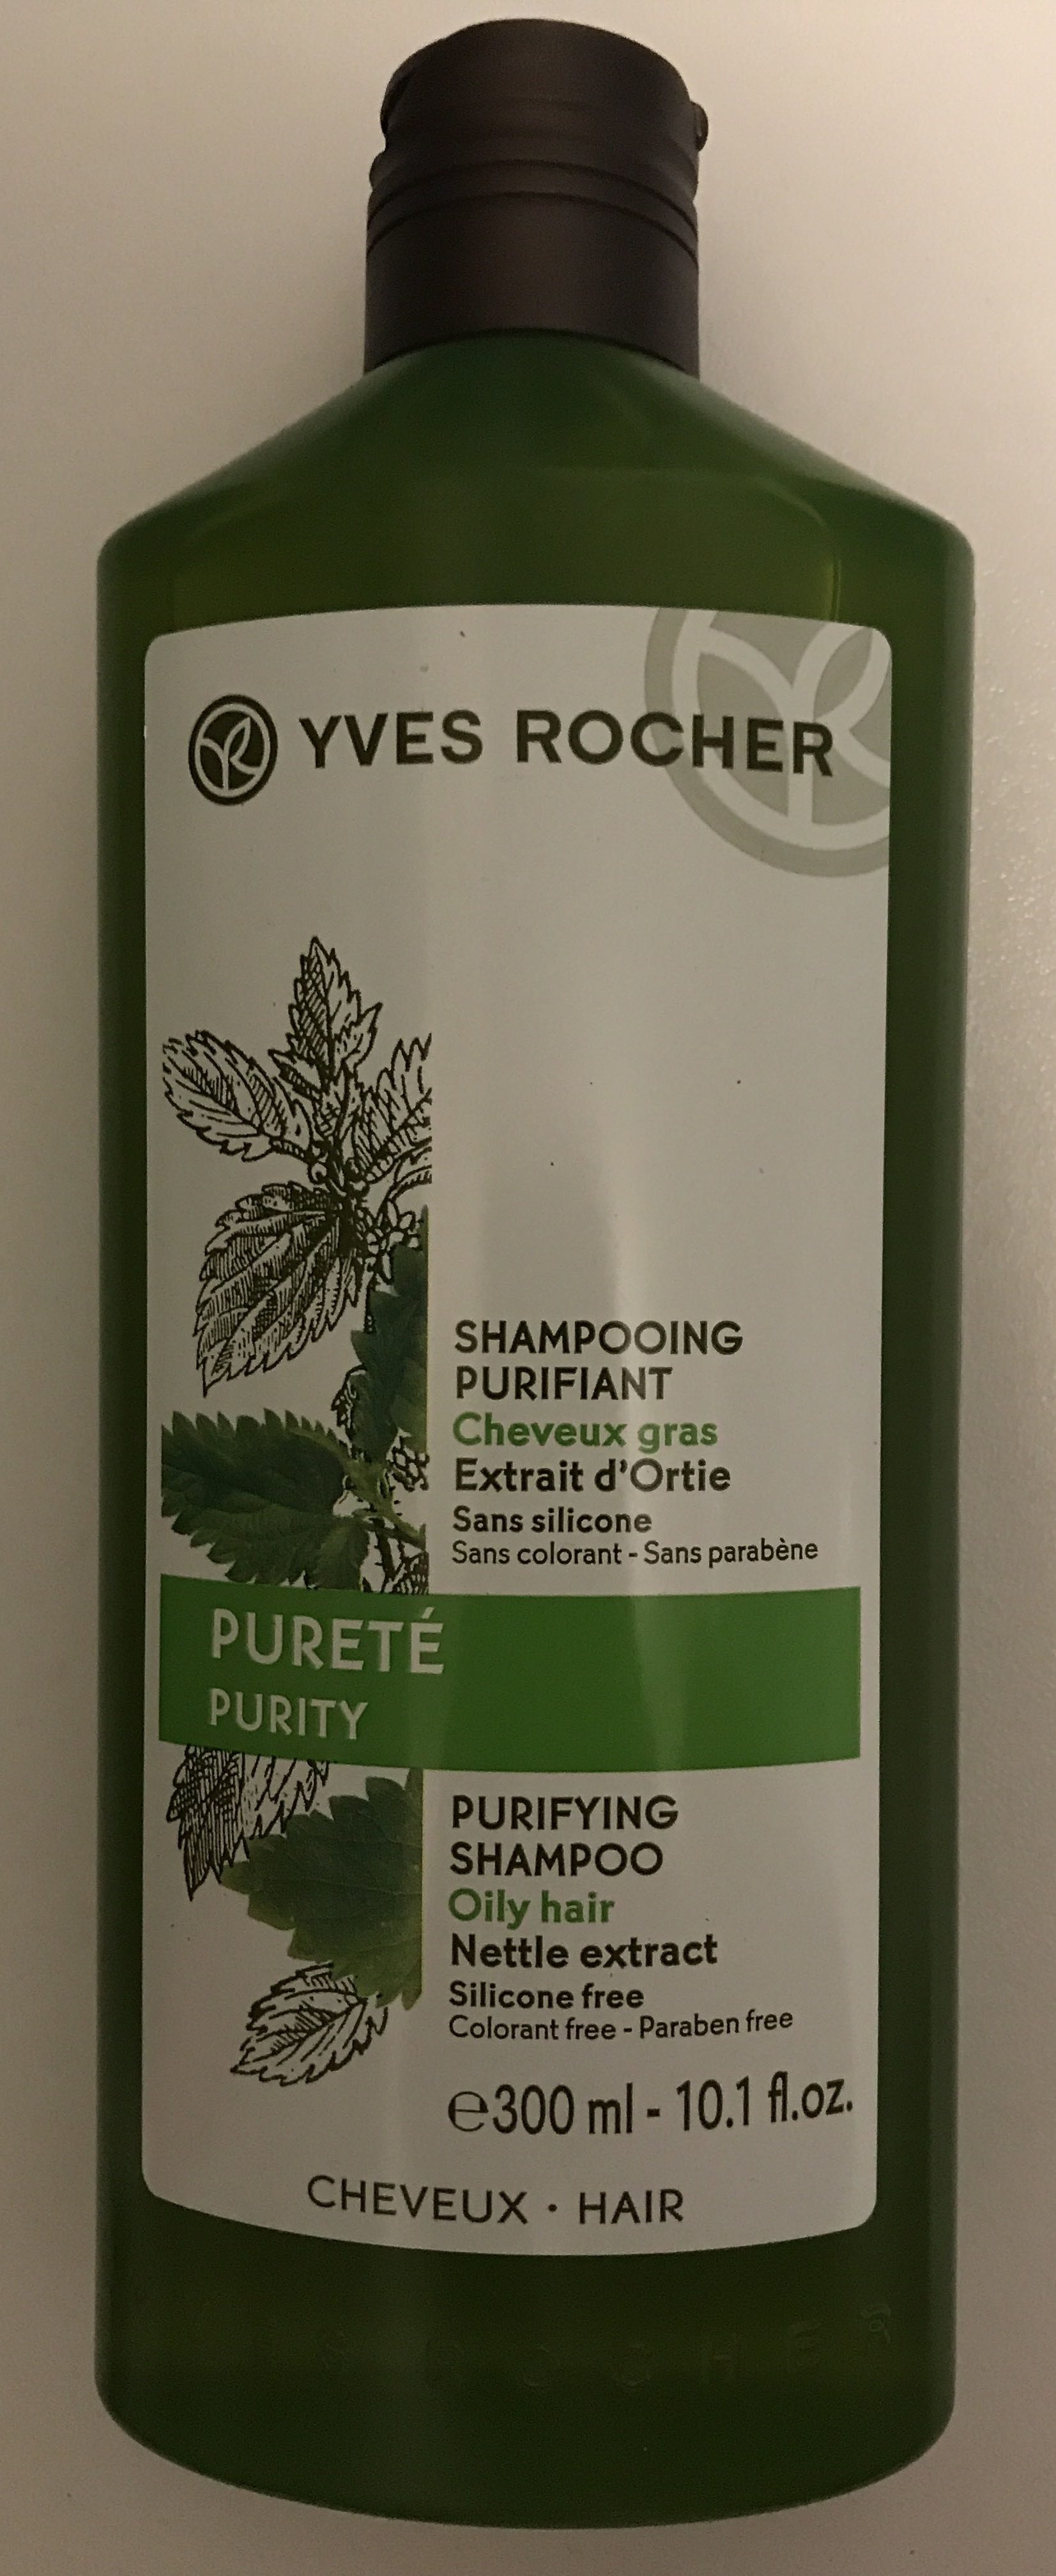 Shampooing purifiant - cheveux gras - Tuote - fr